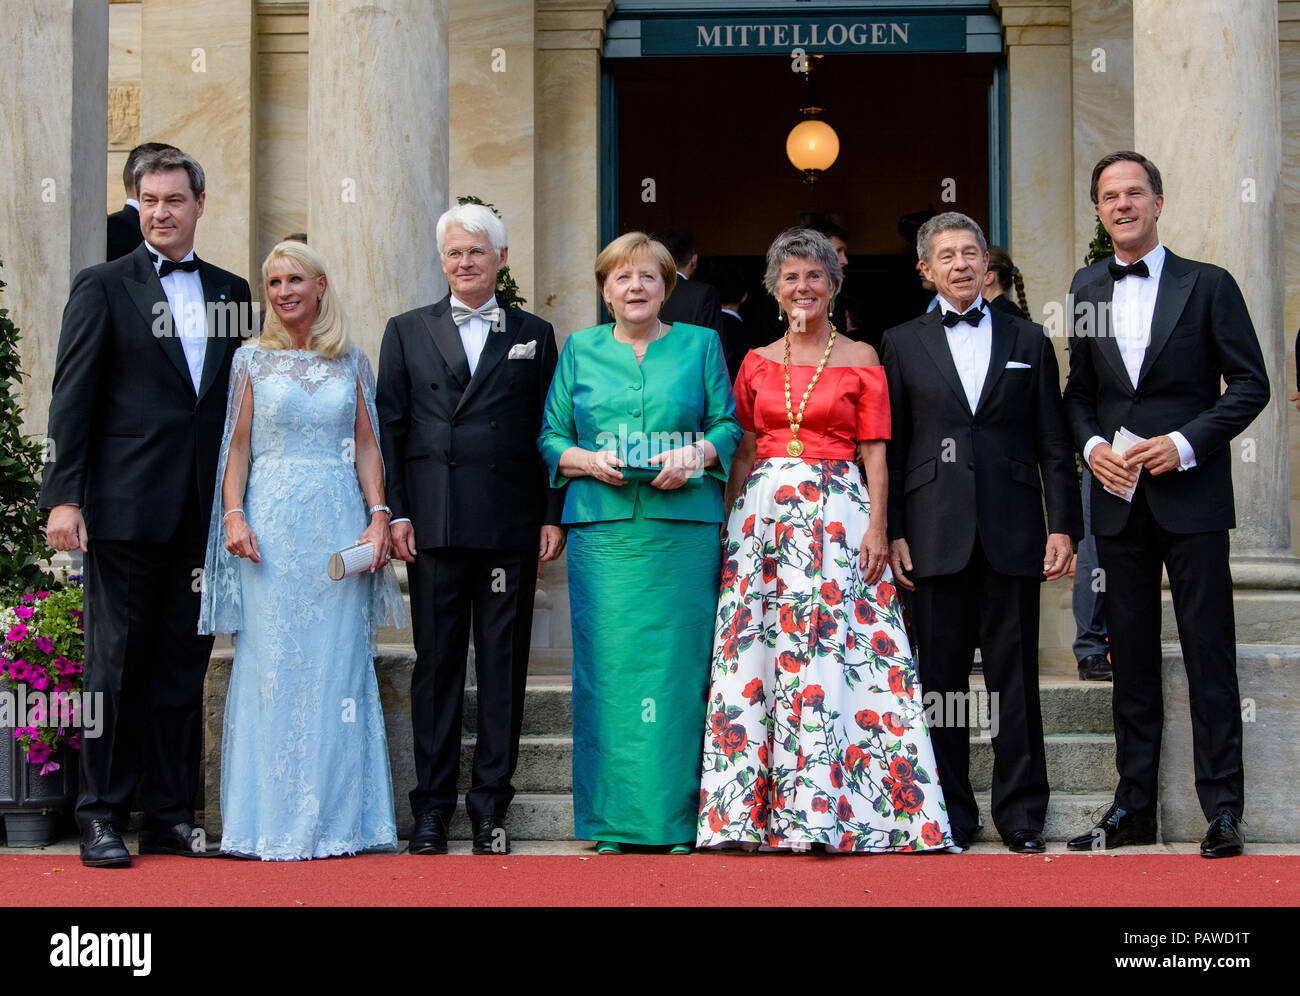 Bayreuth, Germany. 25th July, 2018. Bavarian Minister President Markus Soeder (CSU, l-r), his wife Karin, Thomas Erbe, husband of Bayreuth's mayor, German Chancellor Angela Merkel (CDU), Bayreuth's mayor Brigitte Merk-Erbe, Merkel's husband Joachim Sauer and Dutch Prime Minister Marc Rutte arrive at the festival hall. The Richard-Wagner-Festivals 2018 start with a new performance of Lohengrin'. From 25 July to 29 August, Wagner afficionados travel to the 'Green Hill' to experience the composer's operas. Credit: Matthias Balk/dpa/Alamy Live News Stock Photo